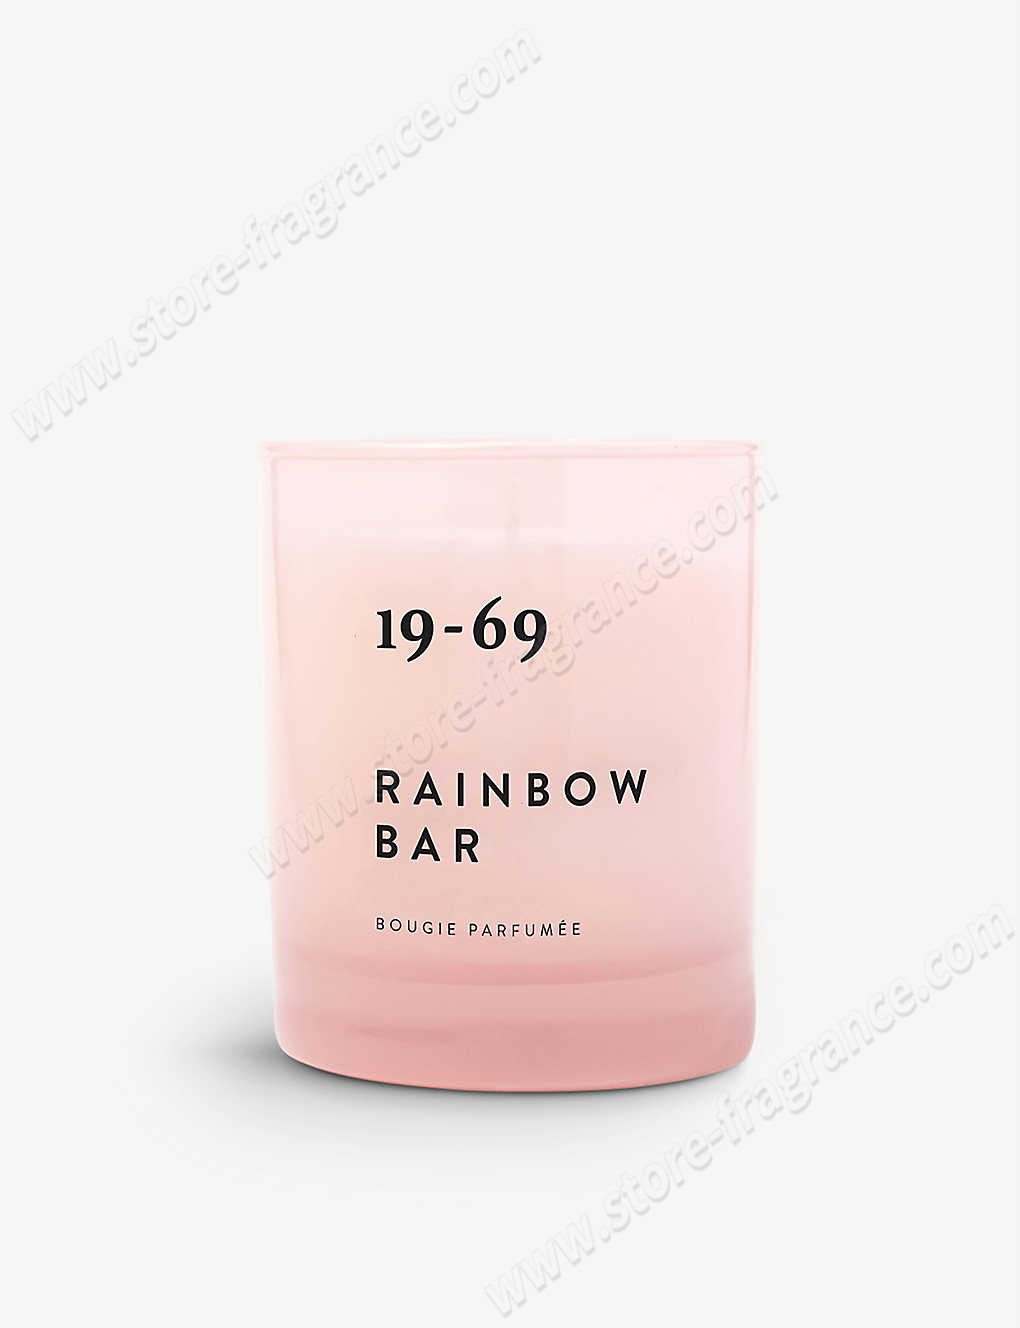 19-69/Rainbow Bar vegetable-wax candle 200ml ✿ Discount Store - 19-69/Rainbow Bar vegetable-wax candle 200ml ✿ Discount Store